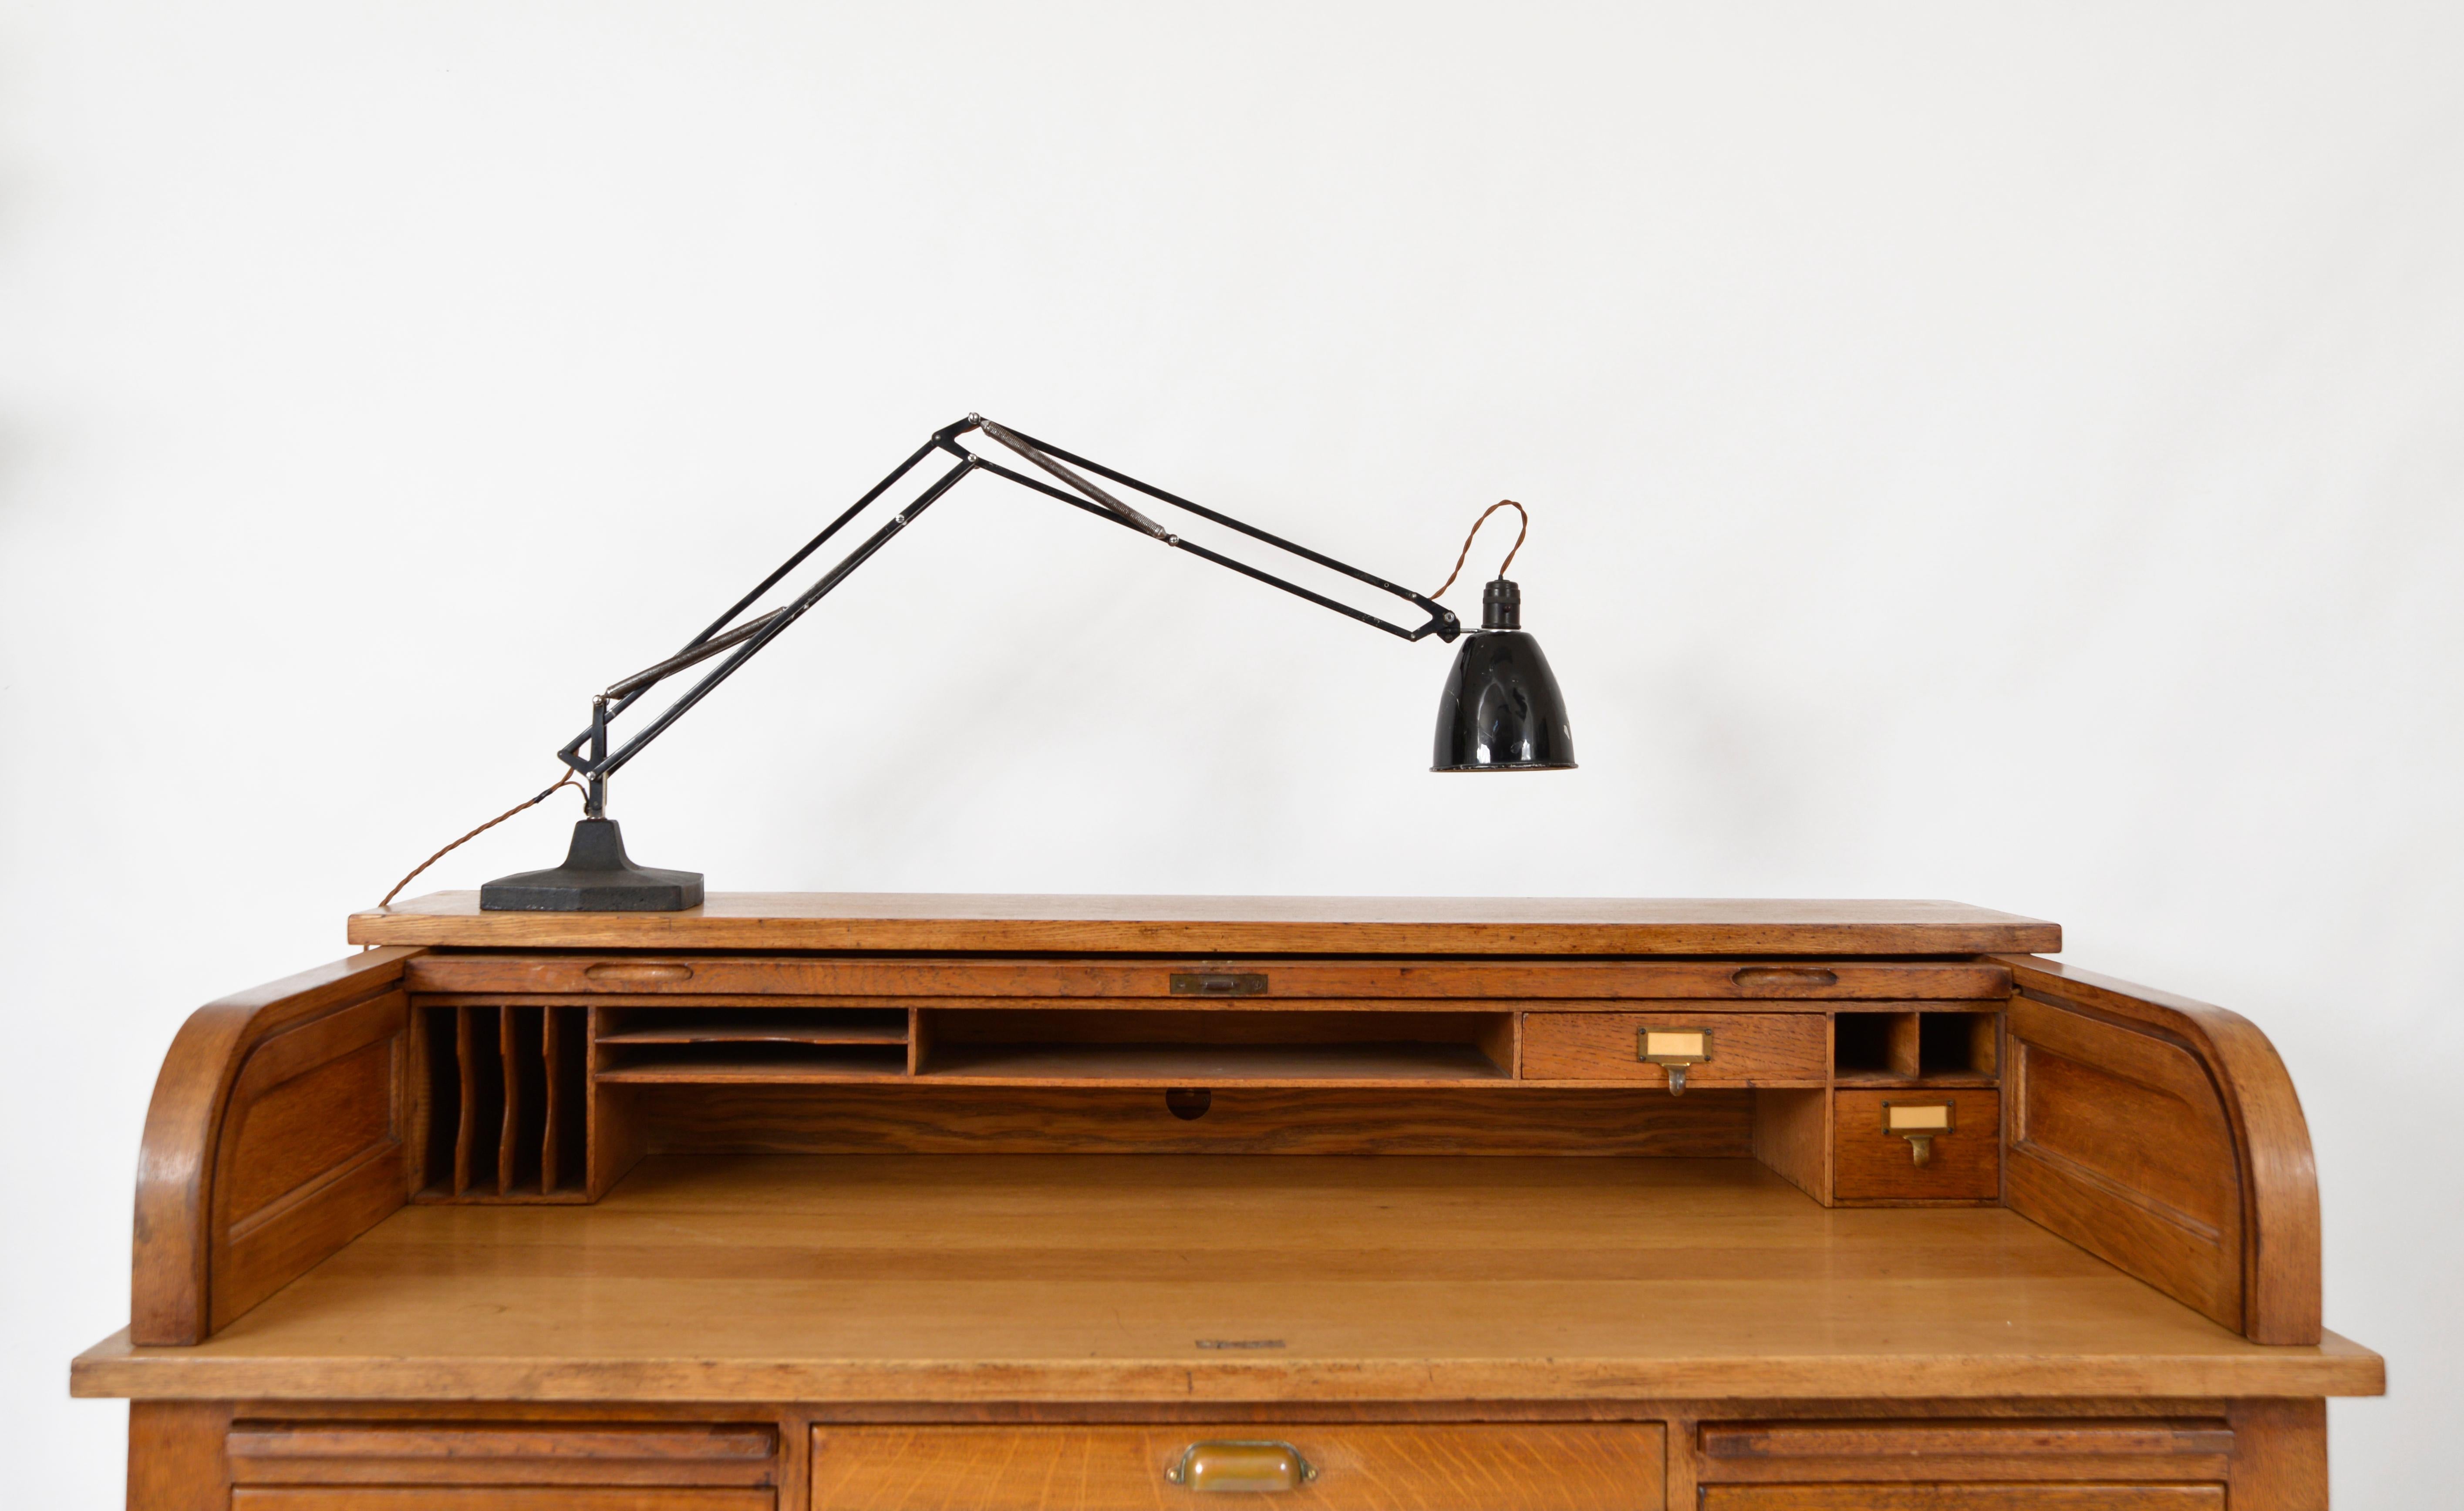 British 1940s Herbert Terry Anglepoise Draughtsman's Task Desk Lamp No 1209 Industrial For Sale